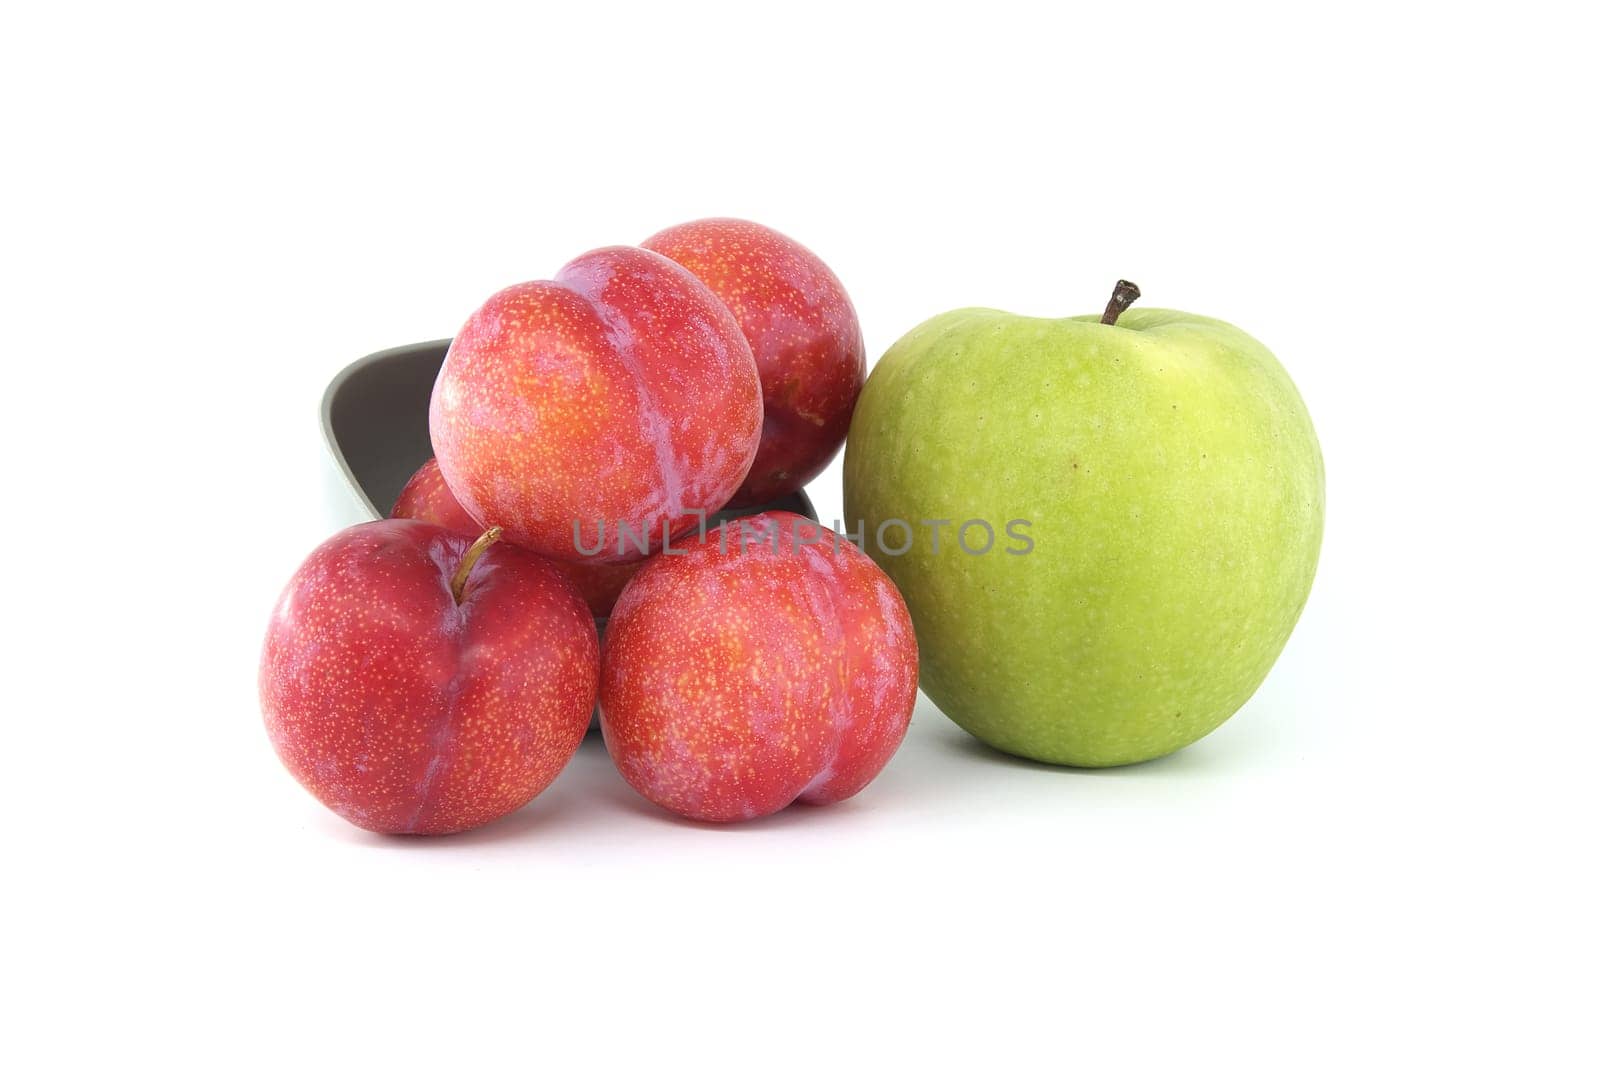 Collection of fresh fruits comprising red plums and bright green apple arranged against a white background